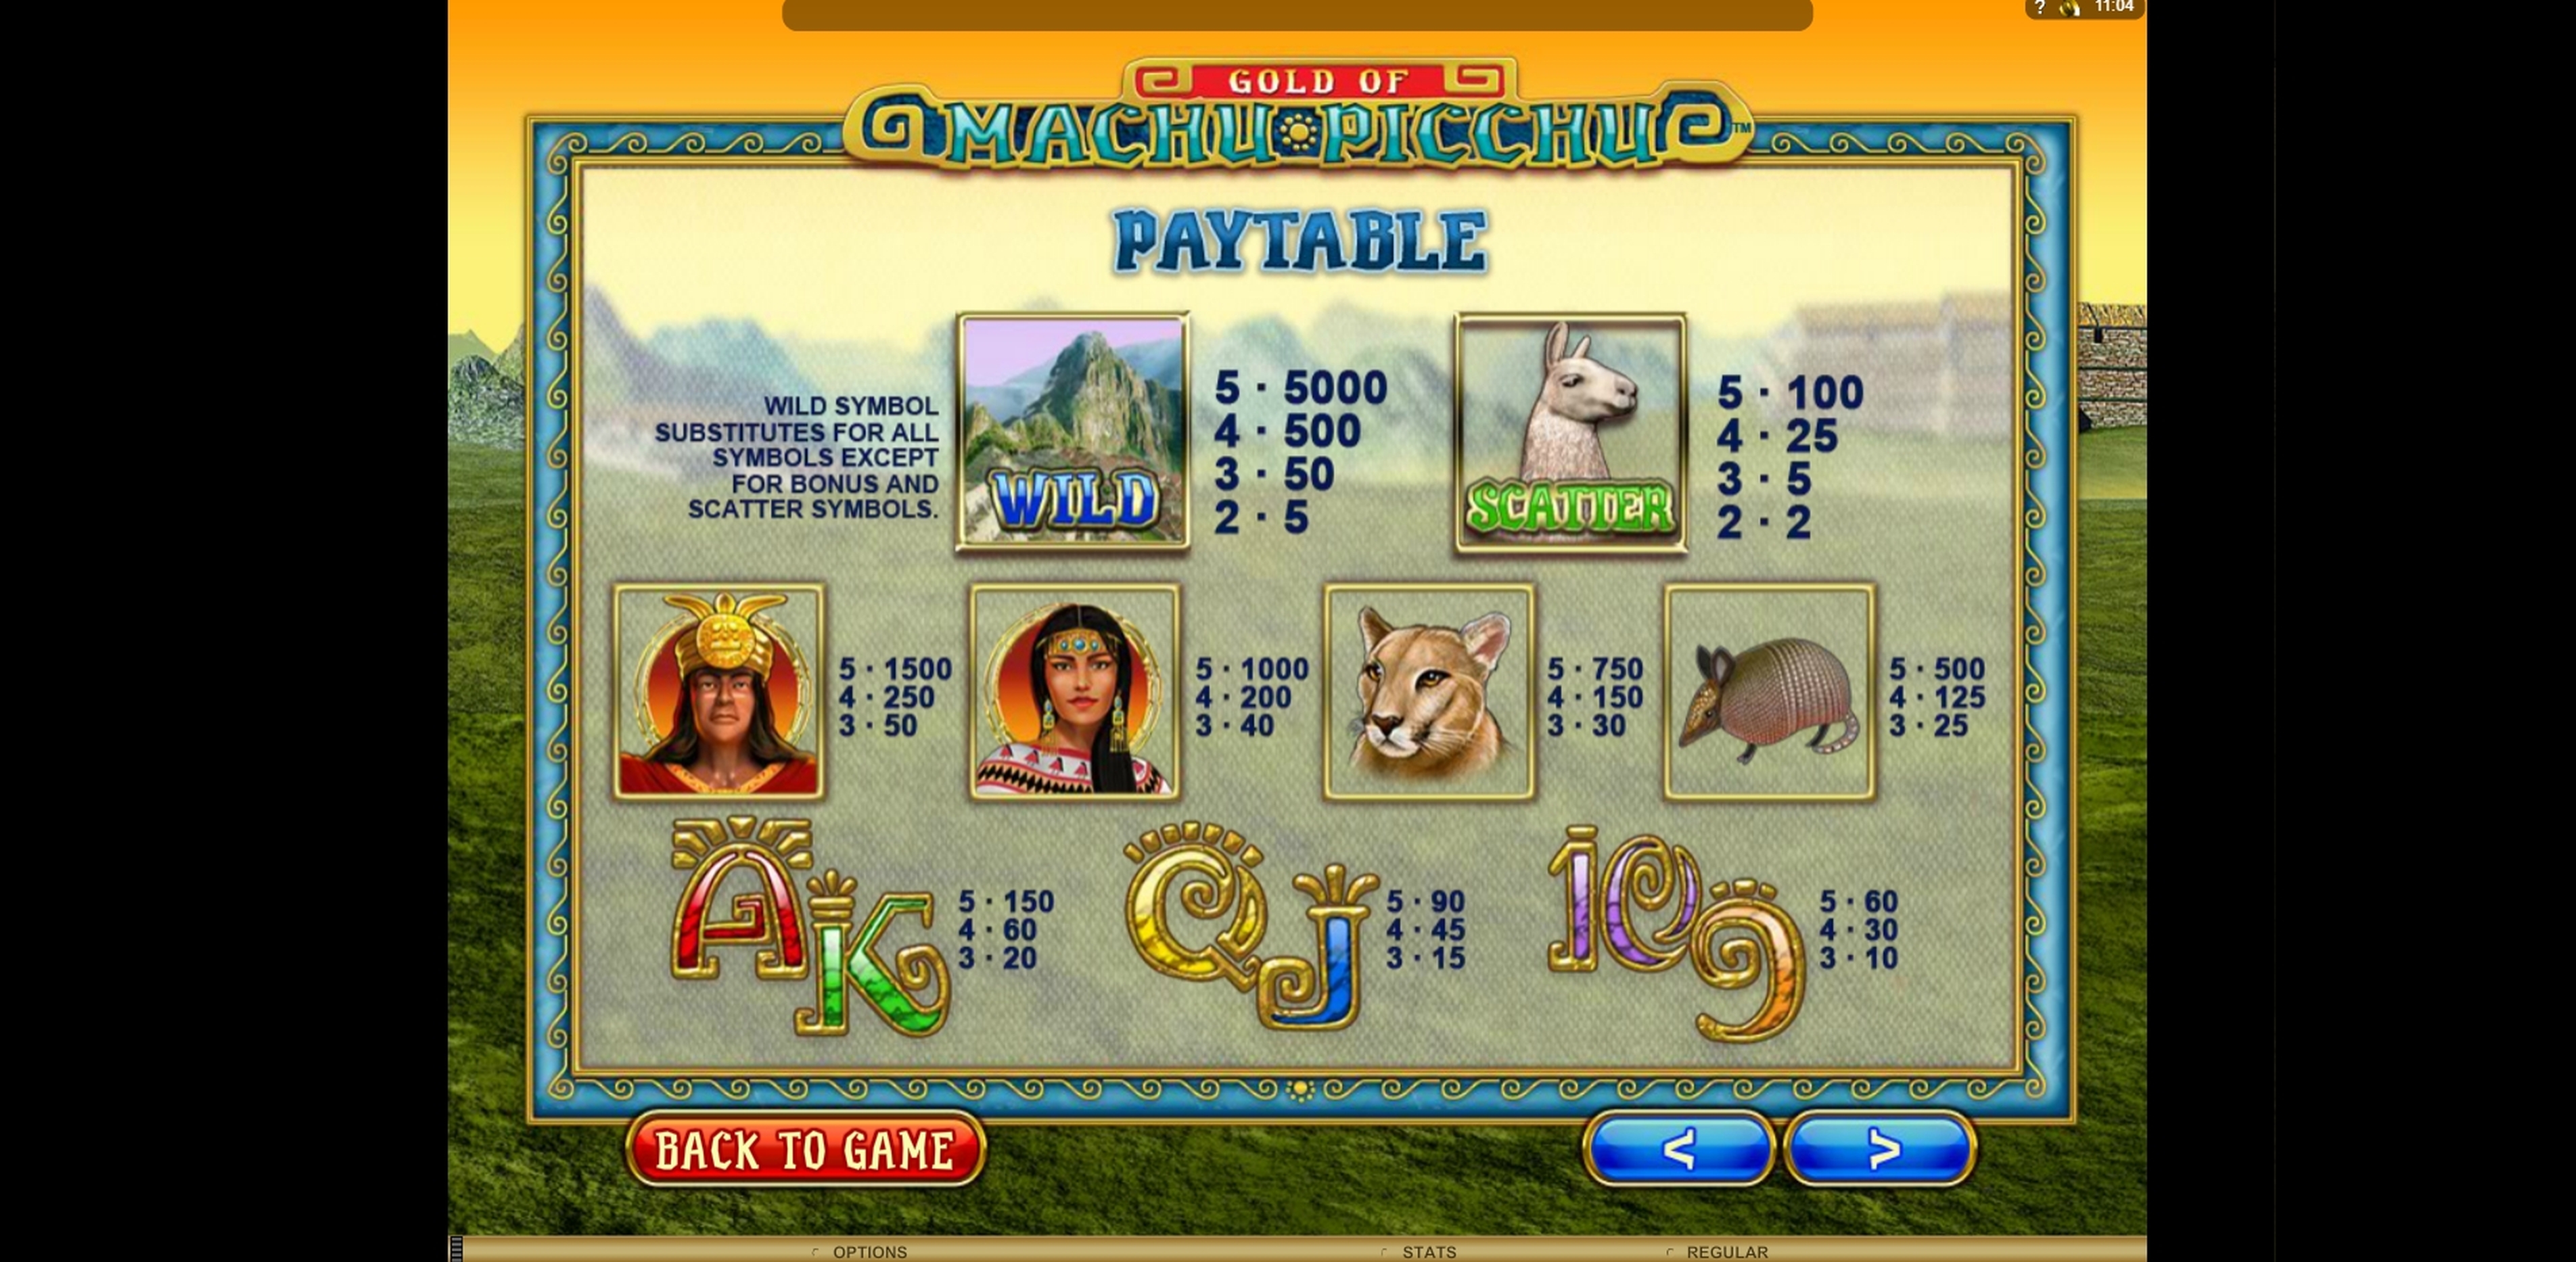 Info of Gold of Machu Picchu Slot Game by Microgaming